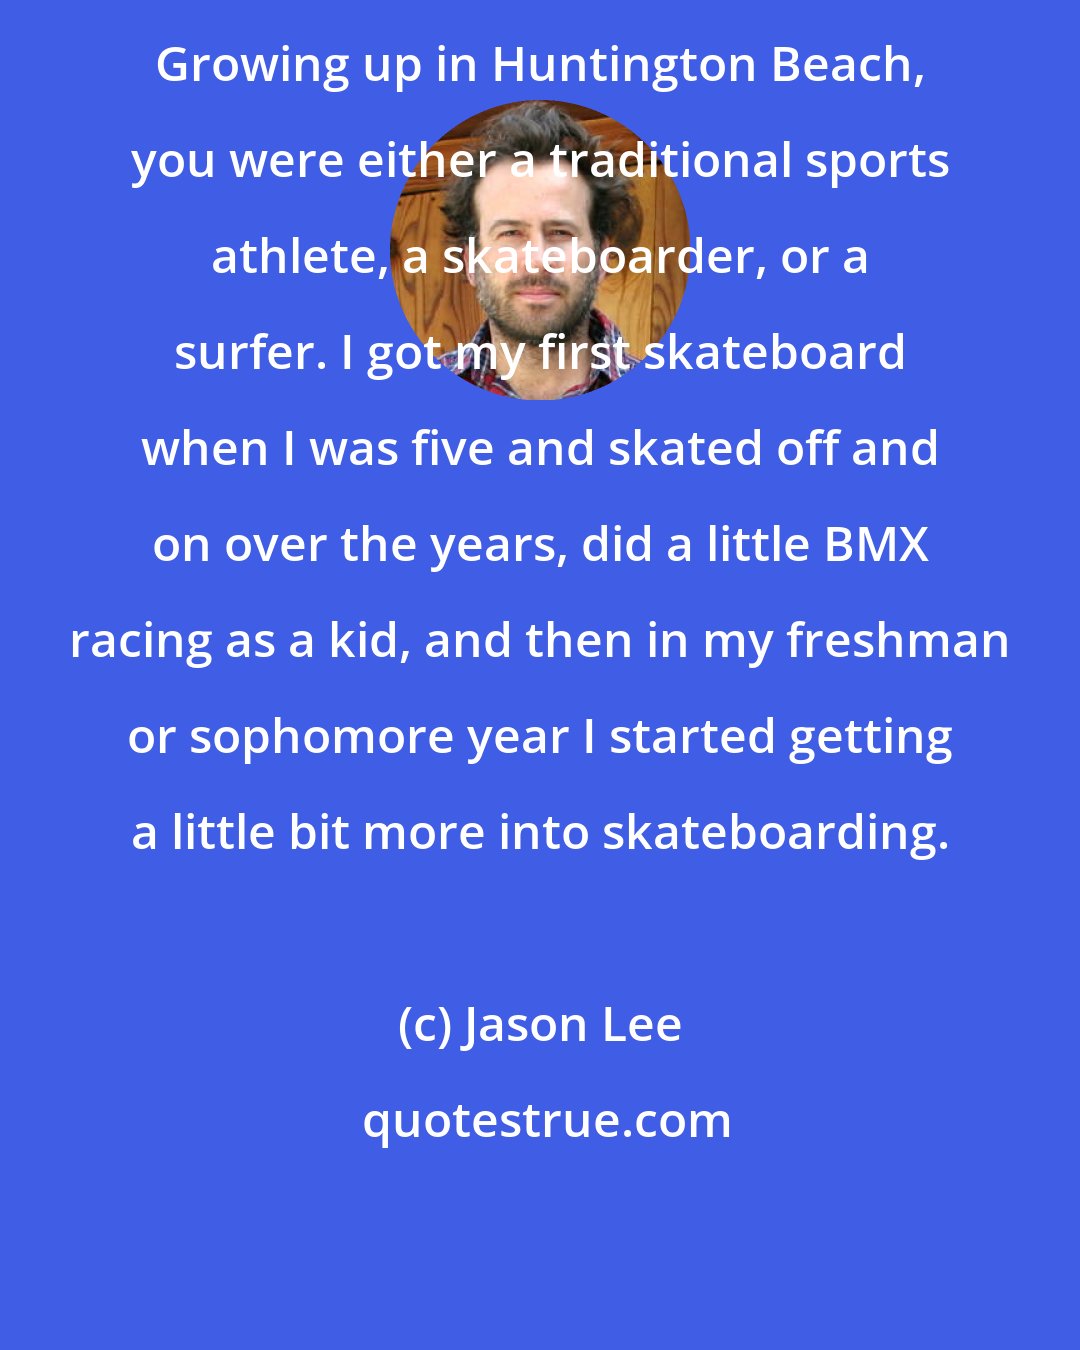 Jason Lee: Growing up in Huntington Beach, you were either a traditional sports athlete, a skateboarder, or a surfer. I got my first skateboard when I was five and skated off and on over the years, did a little BMX racing as a kid, and then in my freshman or sophomore year I started getting a little bit more into skateboarding.